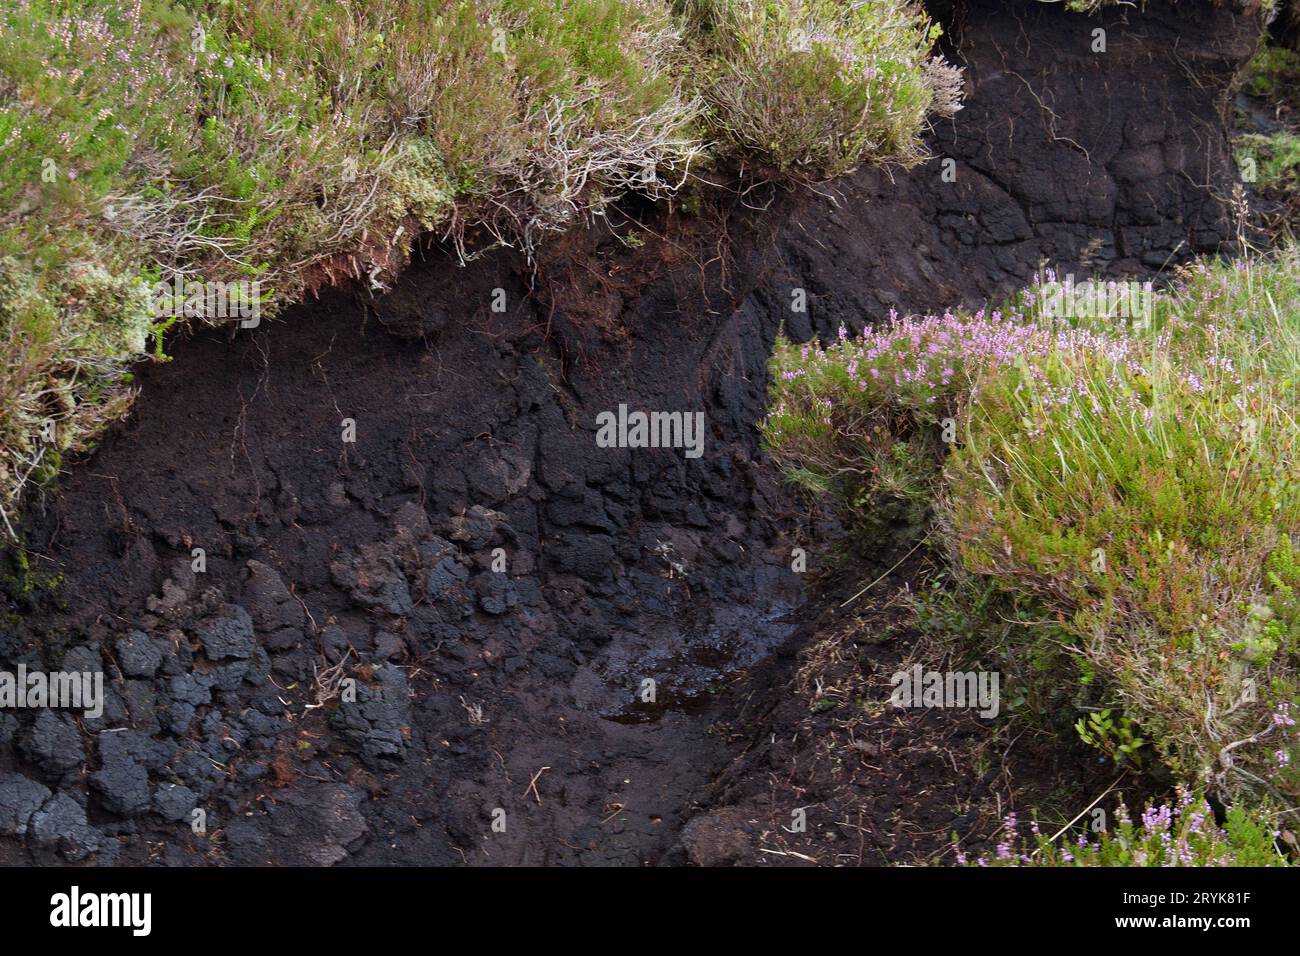 Cracked soil, overgrown with heather, subsoil consisting of peat Stock Photo